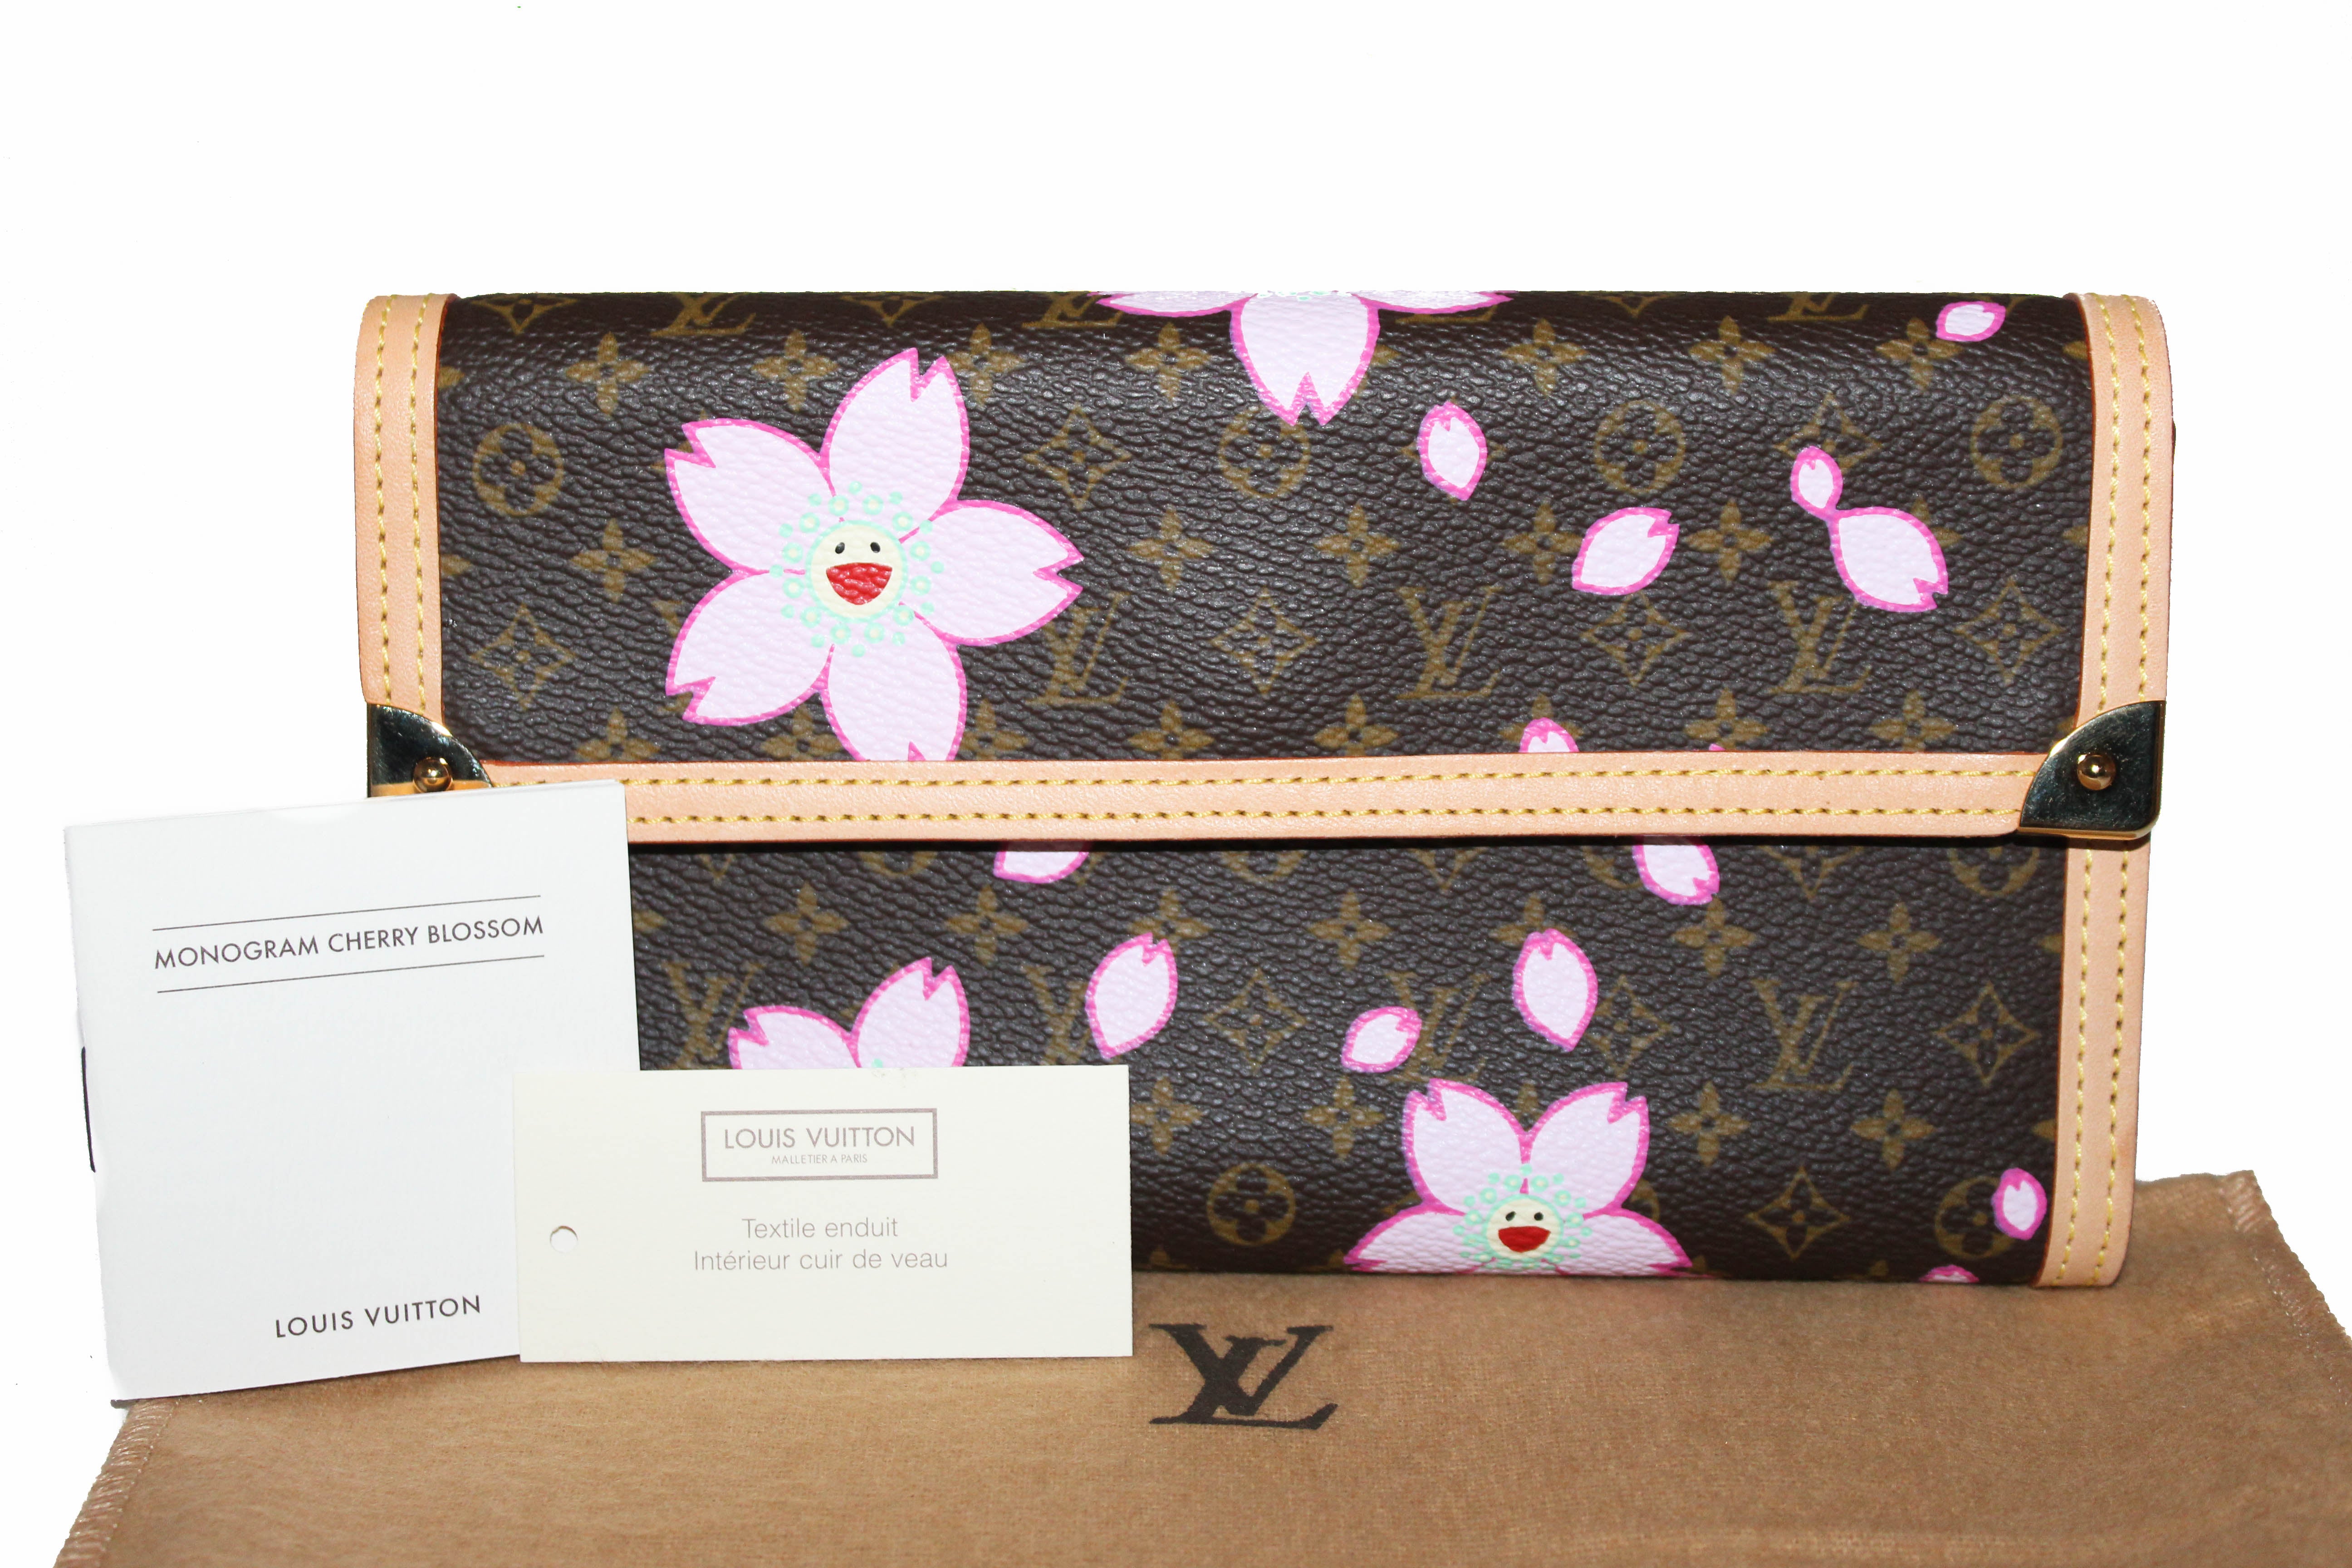 LOUIS VUITTON LIMITED CHERRY BLOSSOM COIN PURSE CARD WALLET at 1stDibs  louis  vuitton cherry blossom wallet, monogram cherry blossom louis vuitton  wallet, louis vuitton cherry blossom purse wallet